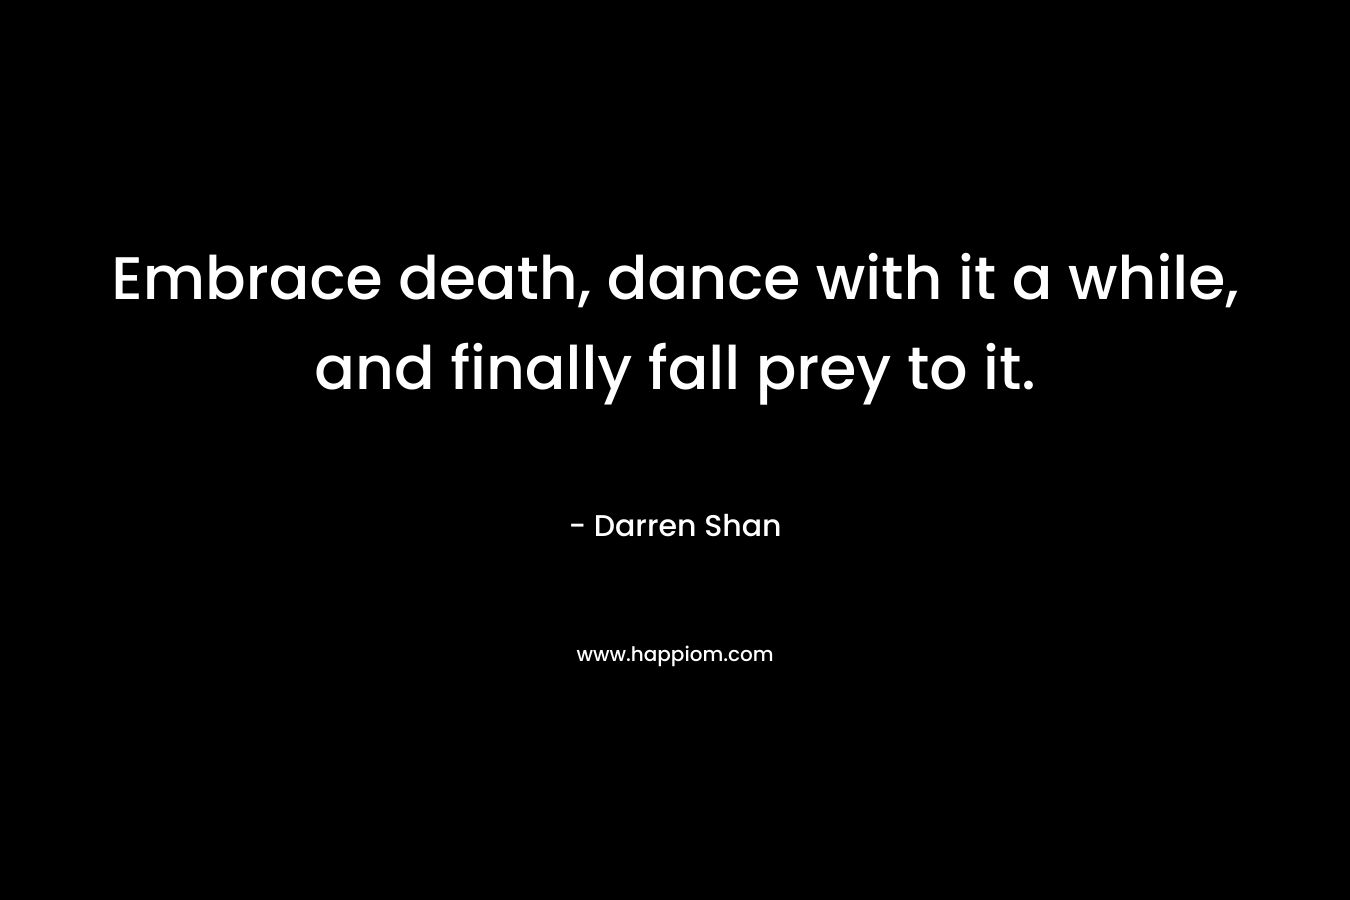 Embrace death, dance with it a while, and finally fall prey to it. – Darren Shan